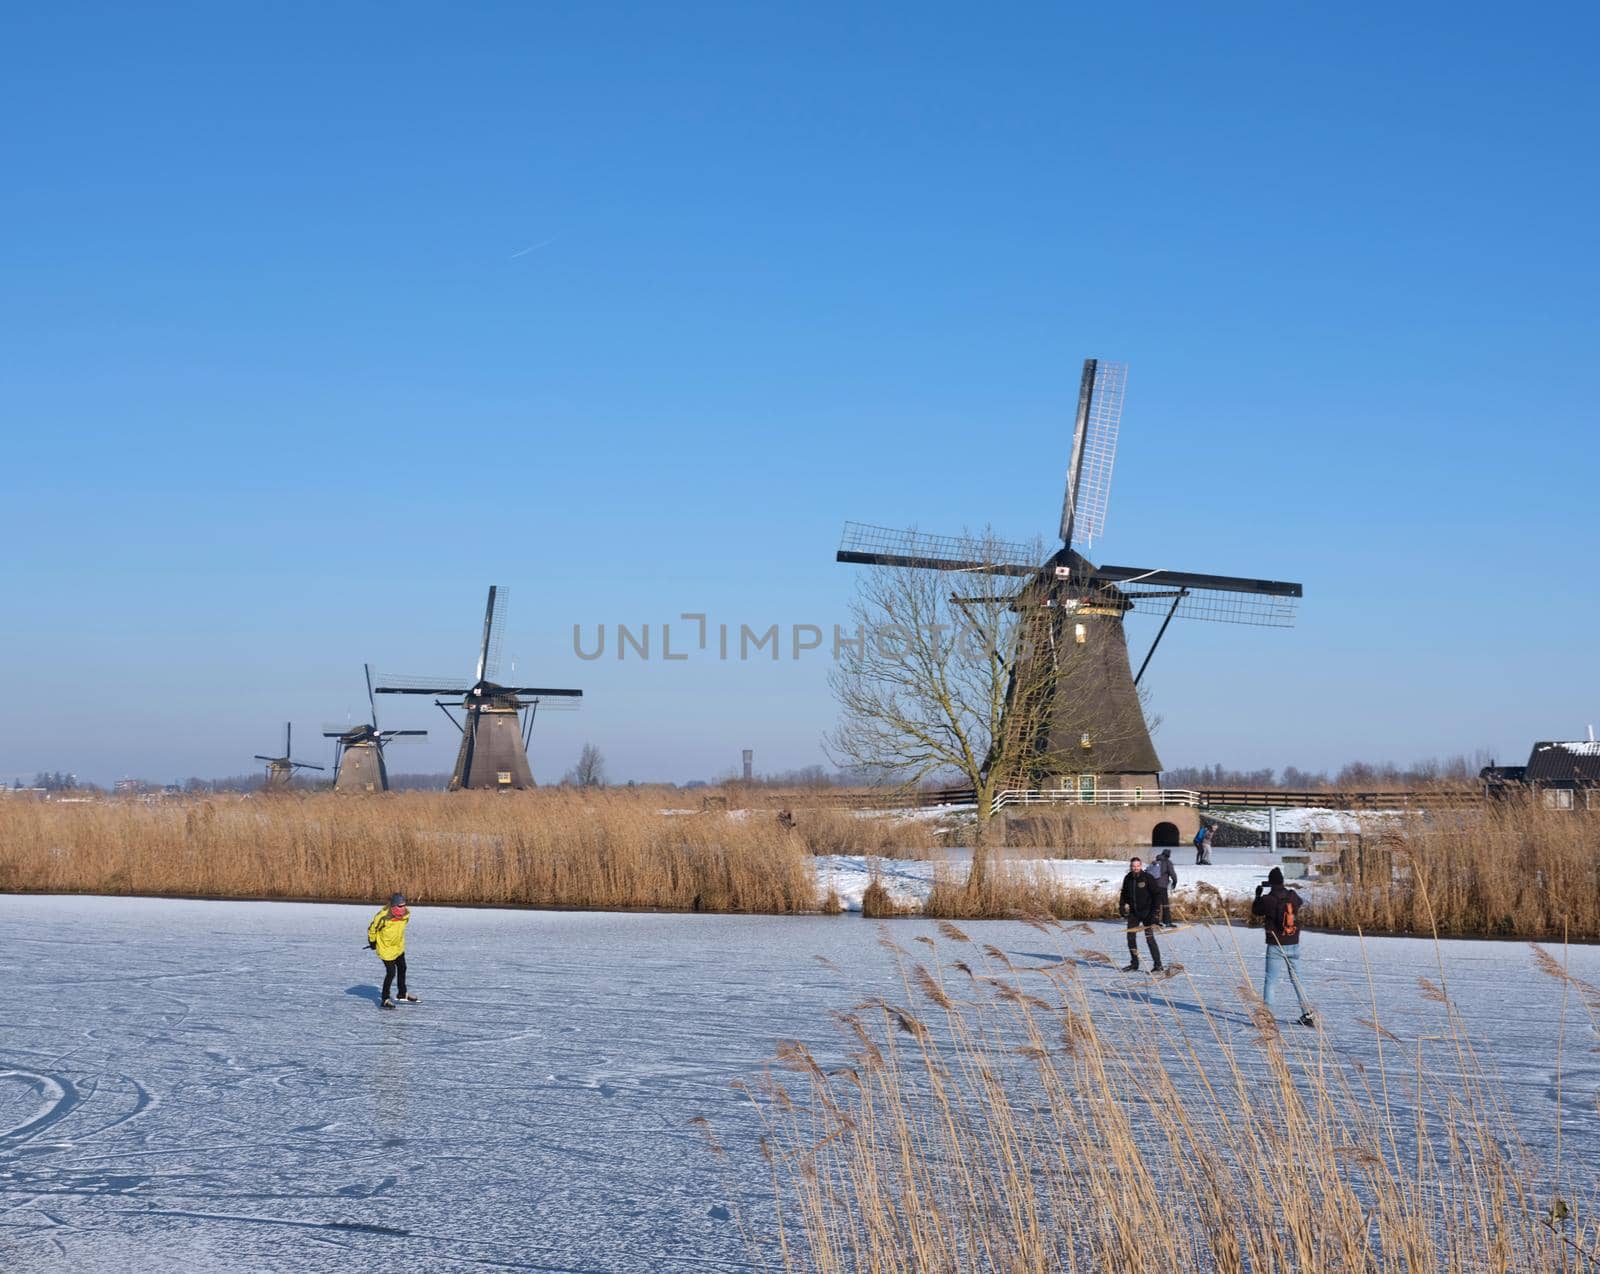 kinderdijk, netherlands, 12 february 2021: people skate on the ice near kinderdijk with al lot of windmills in holland on sunny winter day